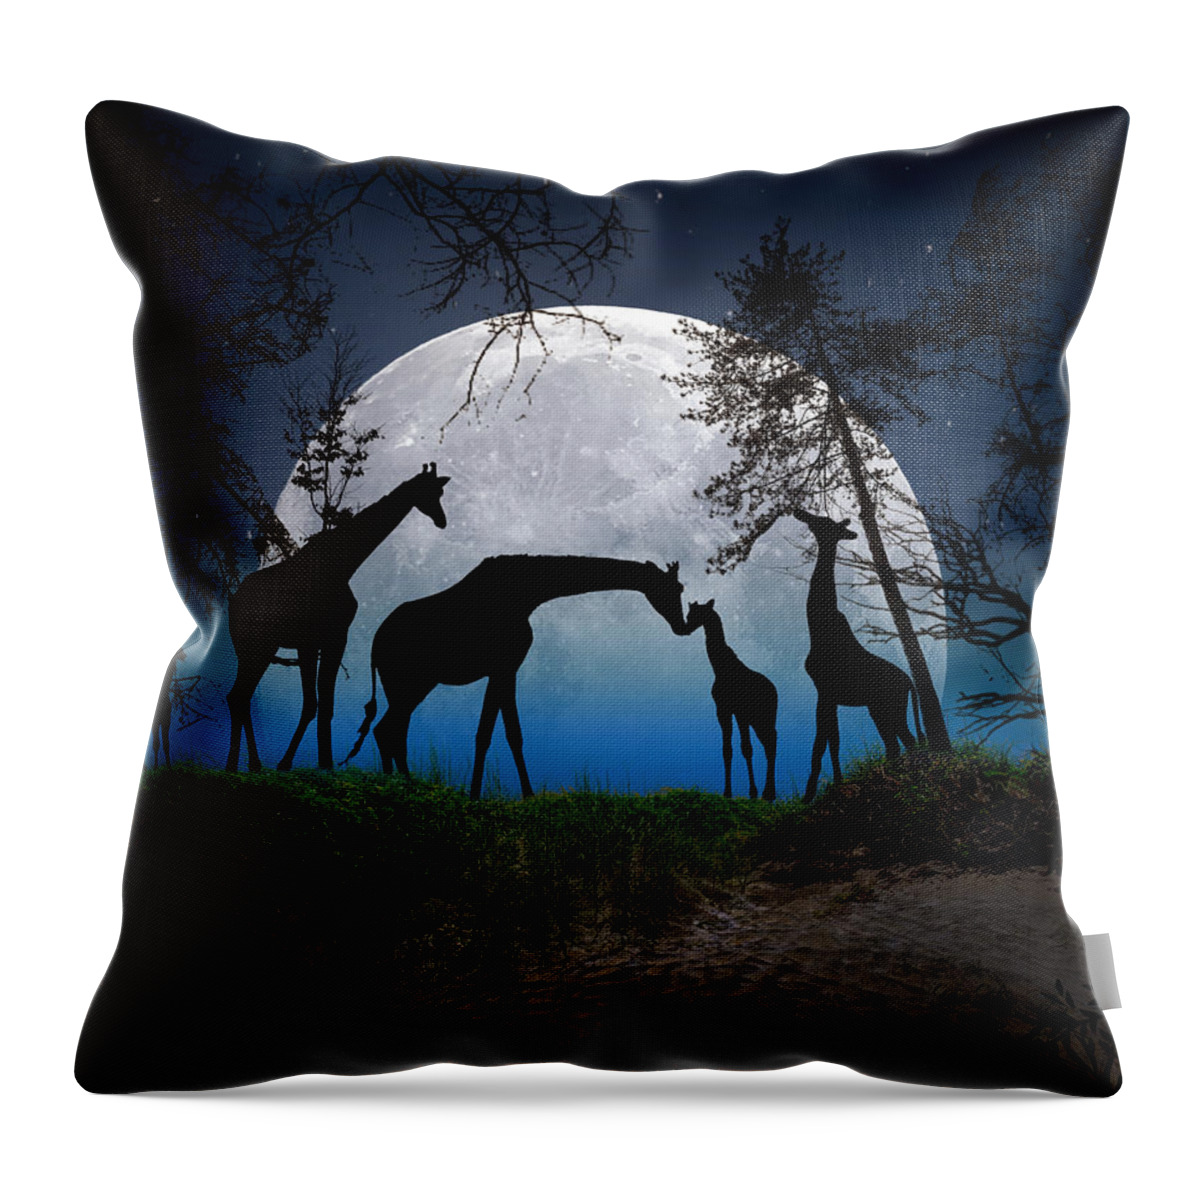 2d Throw Pillow featuring the photograph Night Of The Giraffes by Brian Wallace